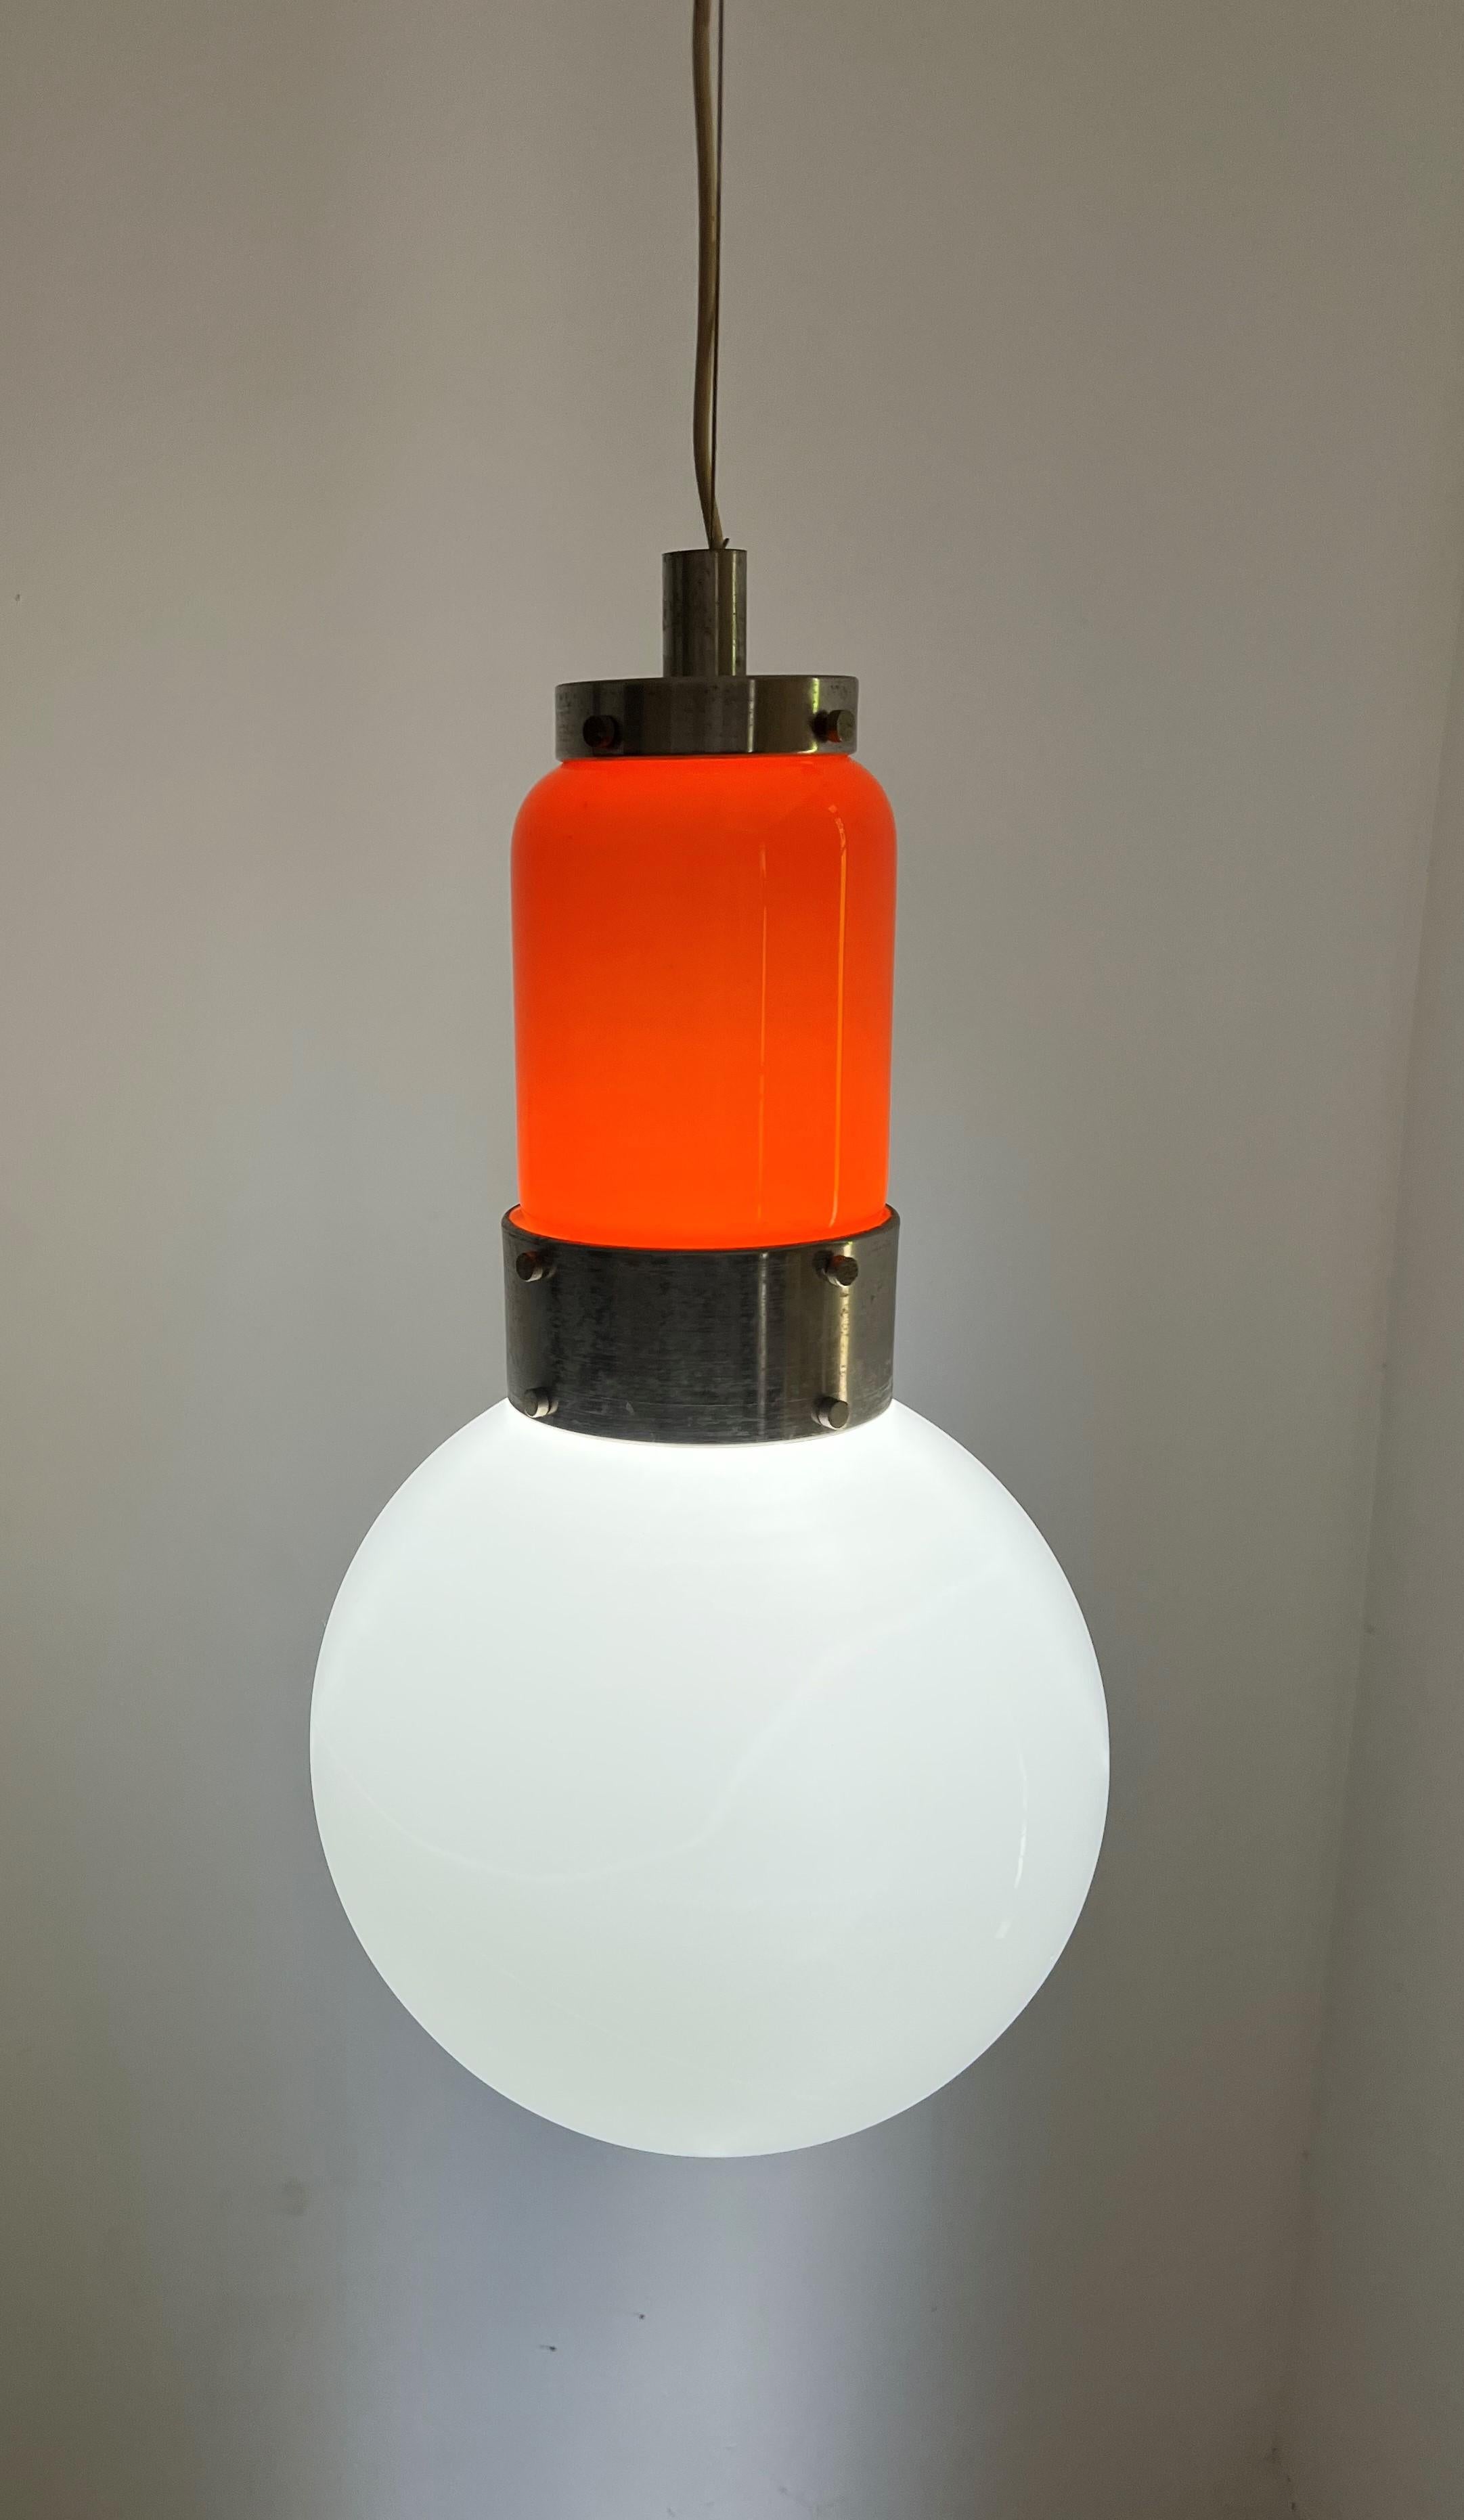 Space age pendant light by Carlo Nason for Mazzega, circa 1970.
This lamp consists of 2 separate pieces in orange and white opaline glass.
The lamp holds one e 27 bulb and has been recently rewired.
The drop of this chandelier can easily be adjusted